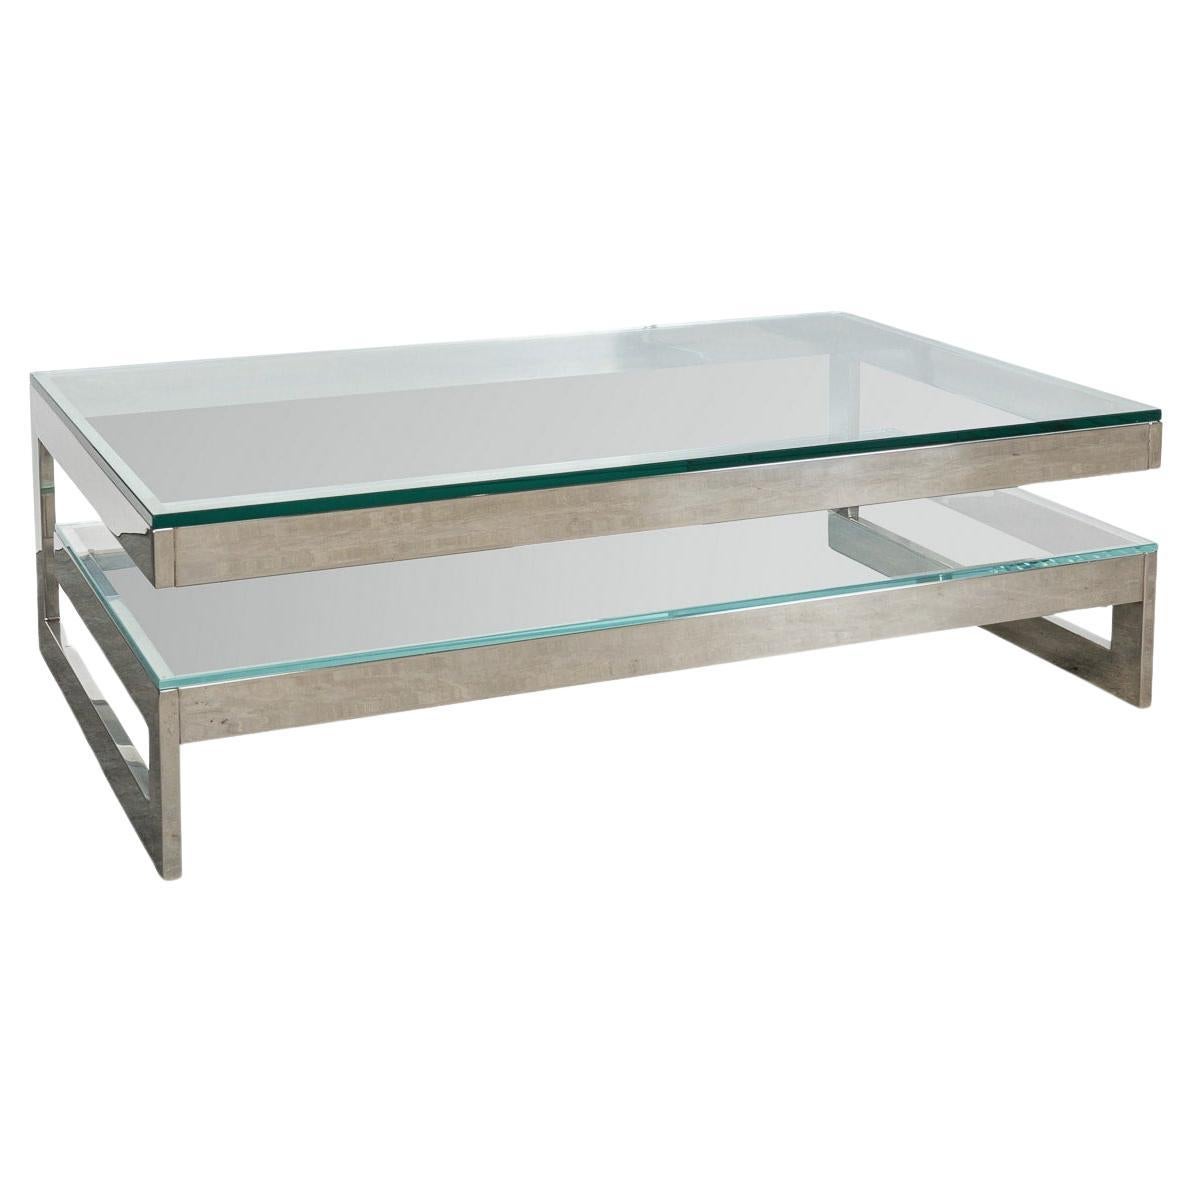 20th Century Polished Metal & Glass Coffee Table By Belgo Chrome, Belgium c.1970 For Sale